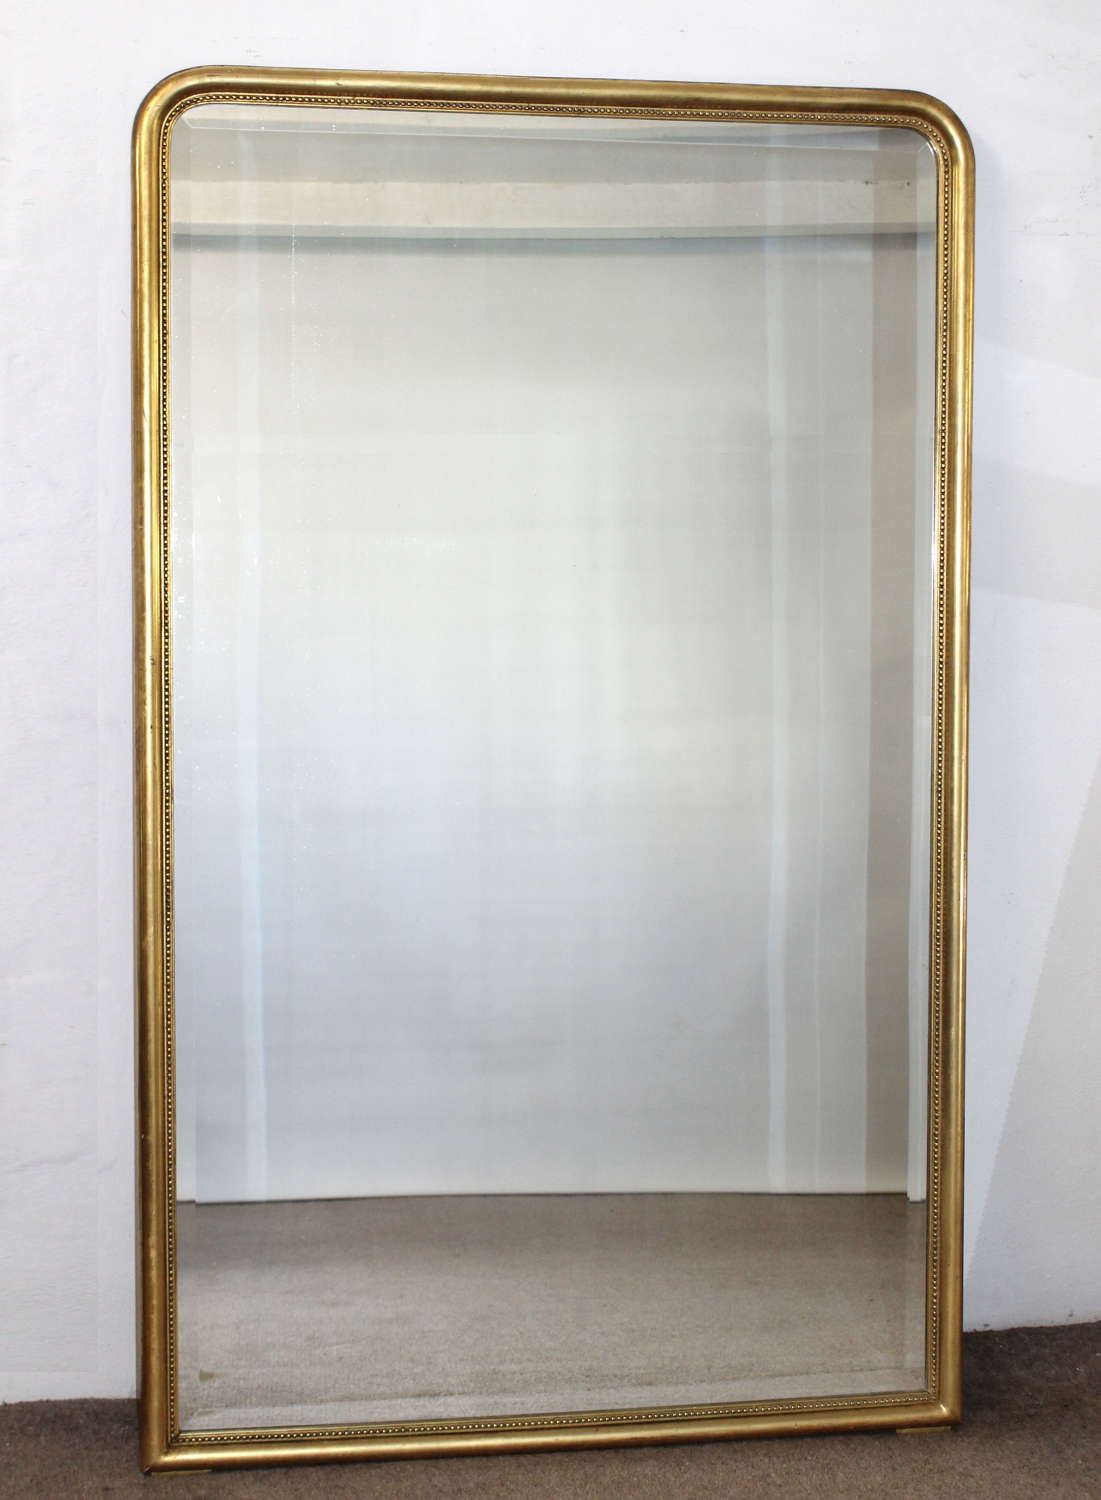 1920s French archtop mirror with narrow gilt frame